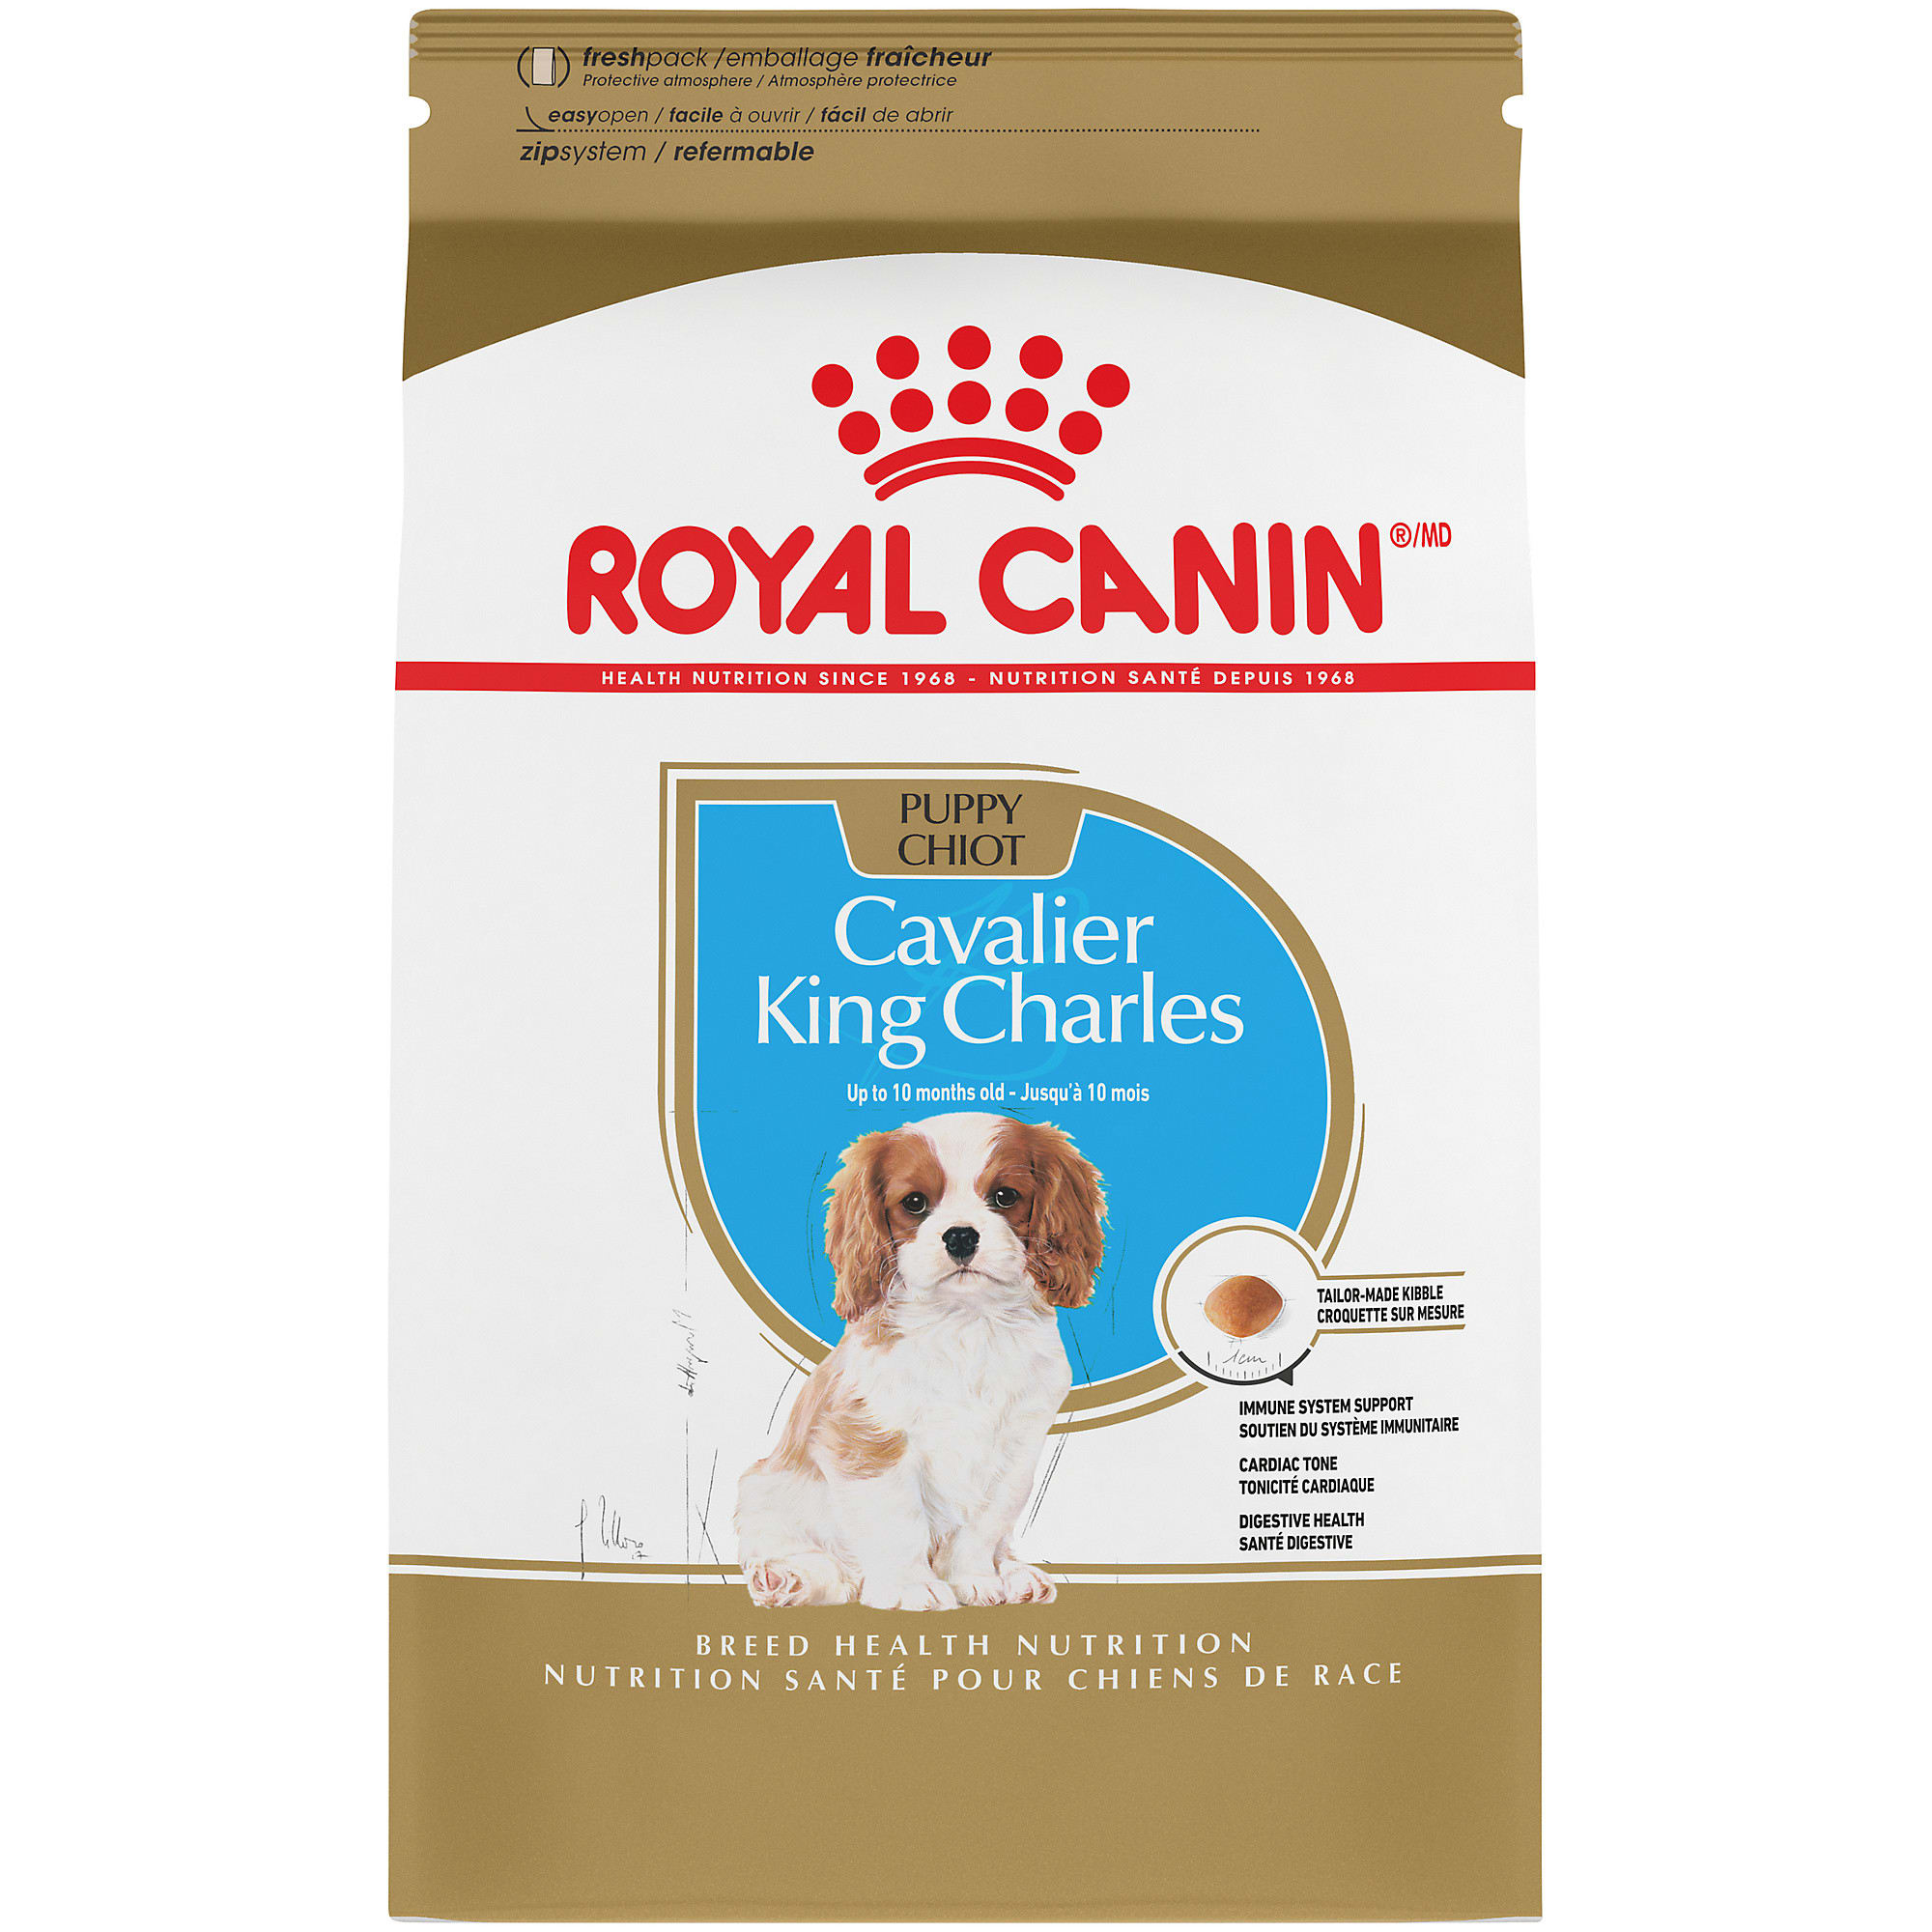 What is the Best Dog Food for Cavalier King Charles?